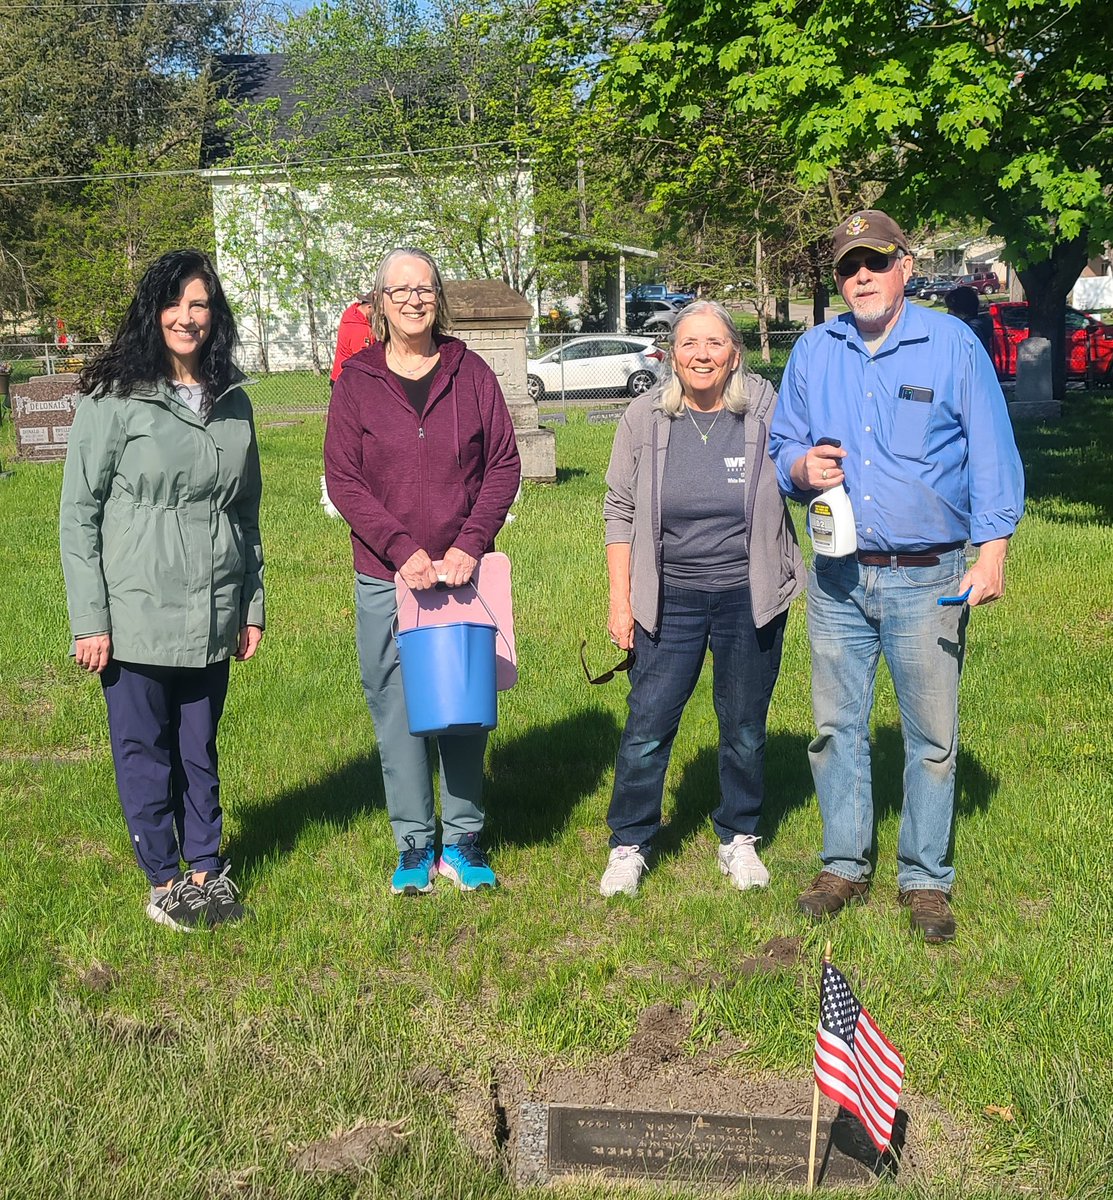 Great turnout today for the annual military headstone cleaning project at Union Cemetery in White Bear Lake in preparation for the Memorial Day event. Good to see so many friends and neighbors this year. We lucked out with a perfect spring day,